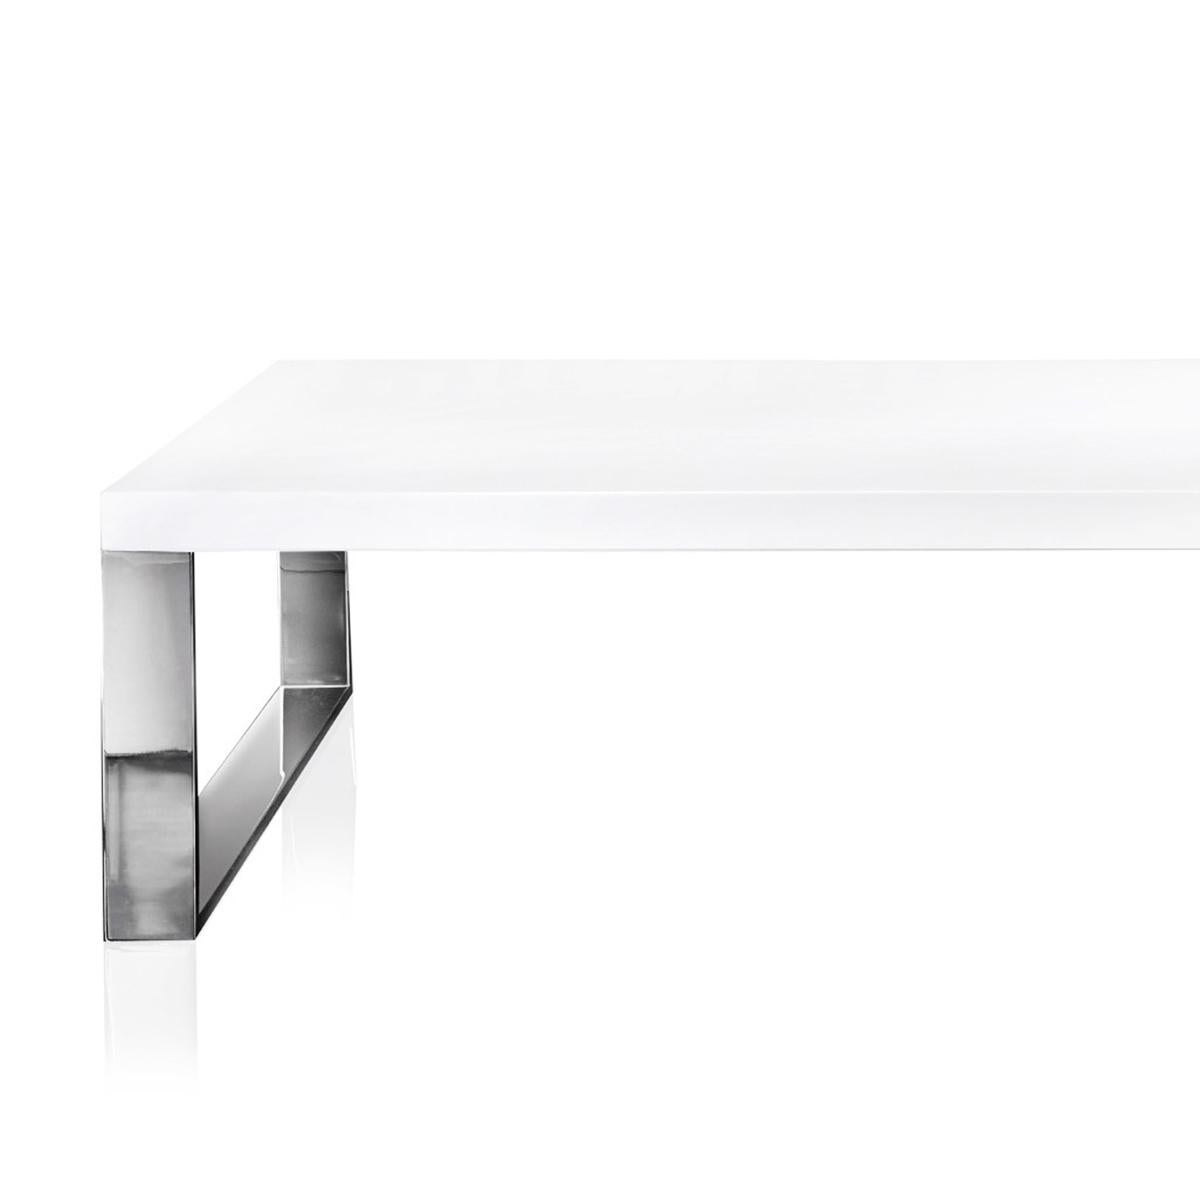 Coffee table teddy white with chrome feet
and with white lacquered wooden top, square
coffee table.
Also available in square coffee table teddy black
with chrome feet and with black lacquered 
wooden top.